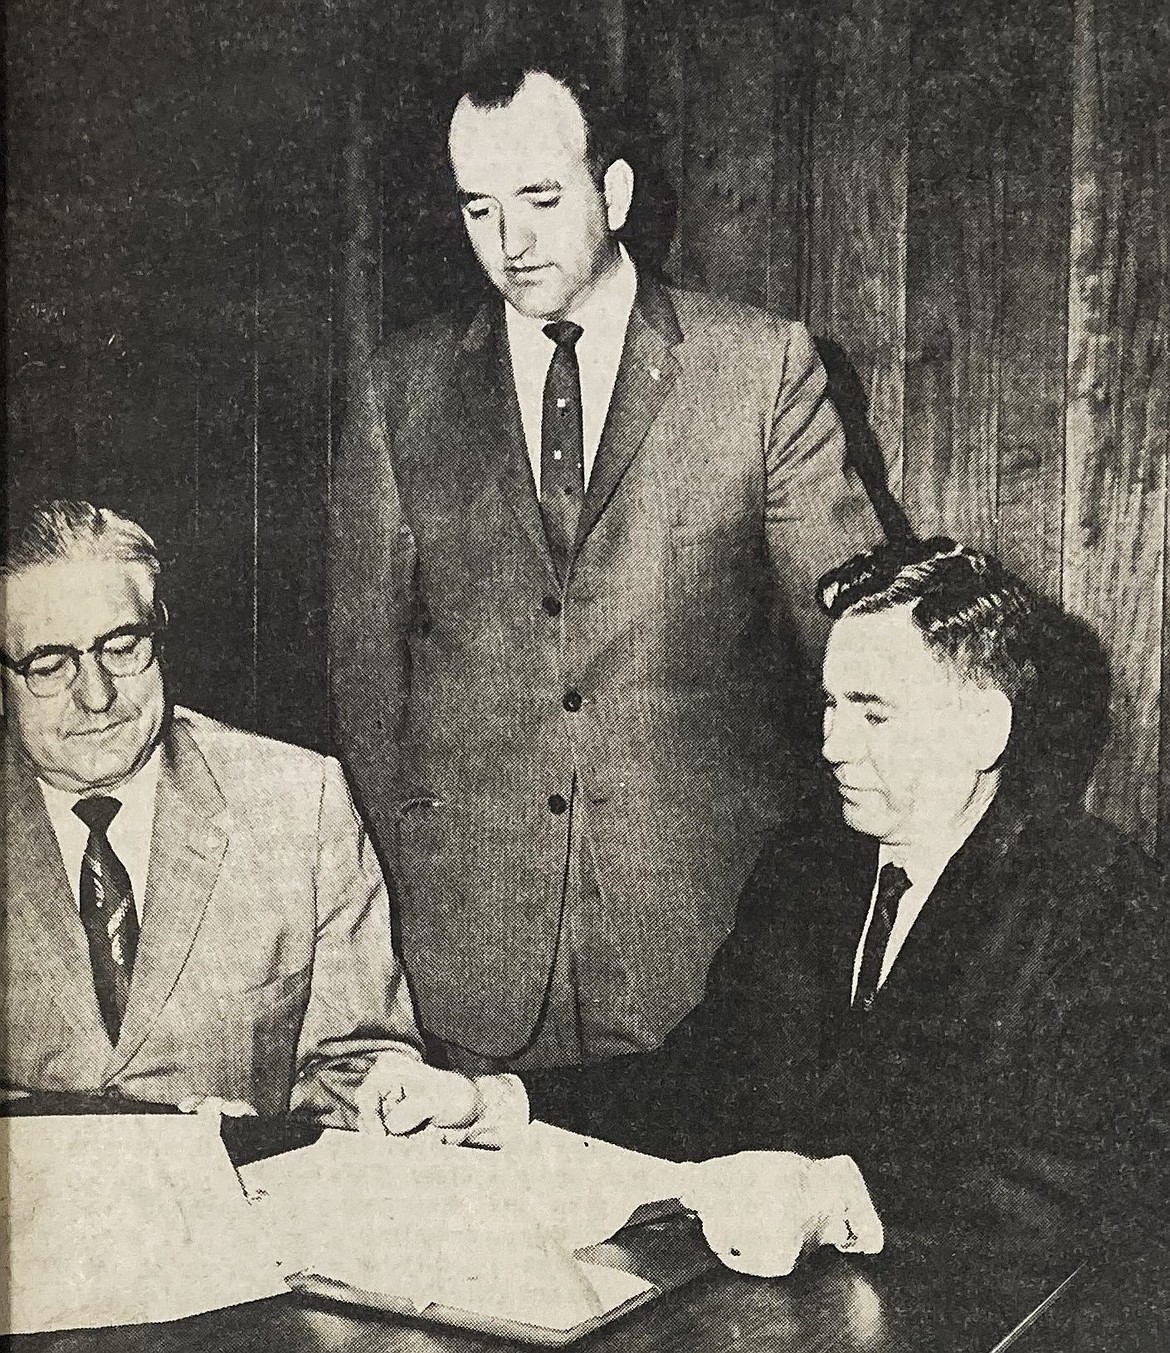 Kennedy Commission officers L.L. Gardner (seated, left), James McKinnon (right) and John Hunt consider ways to honor JFK.